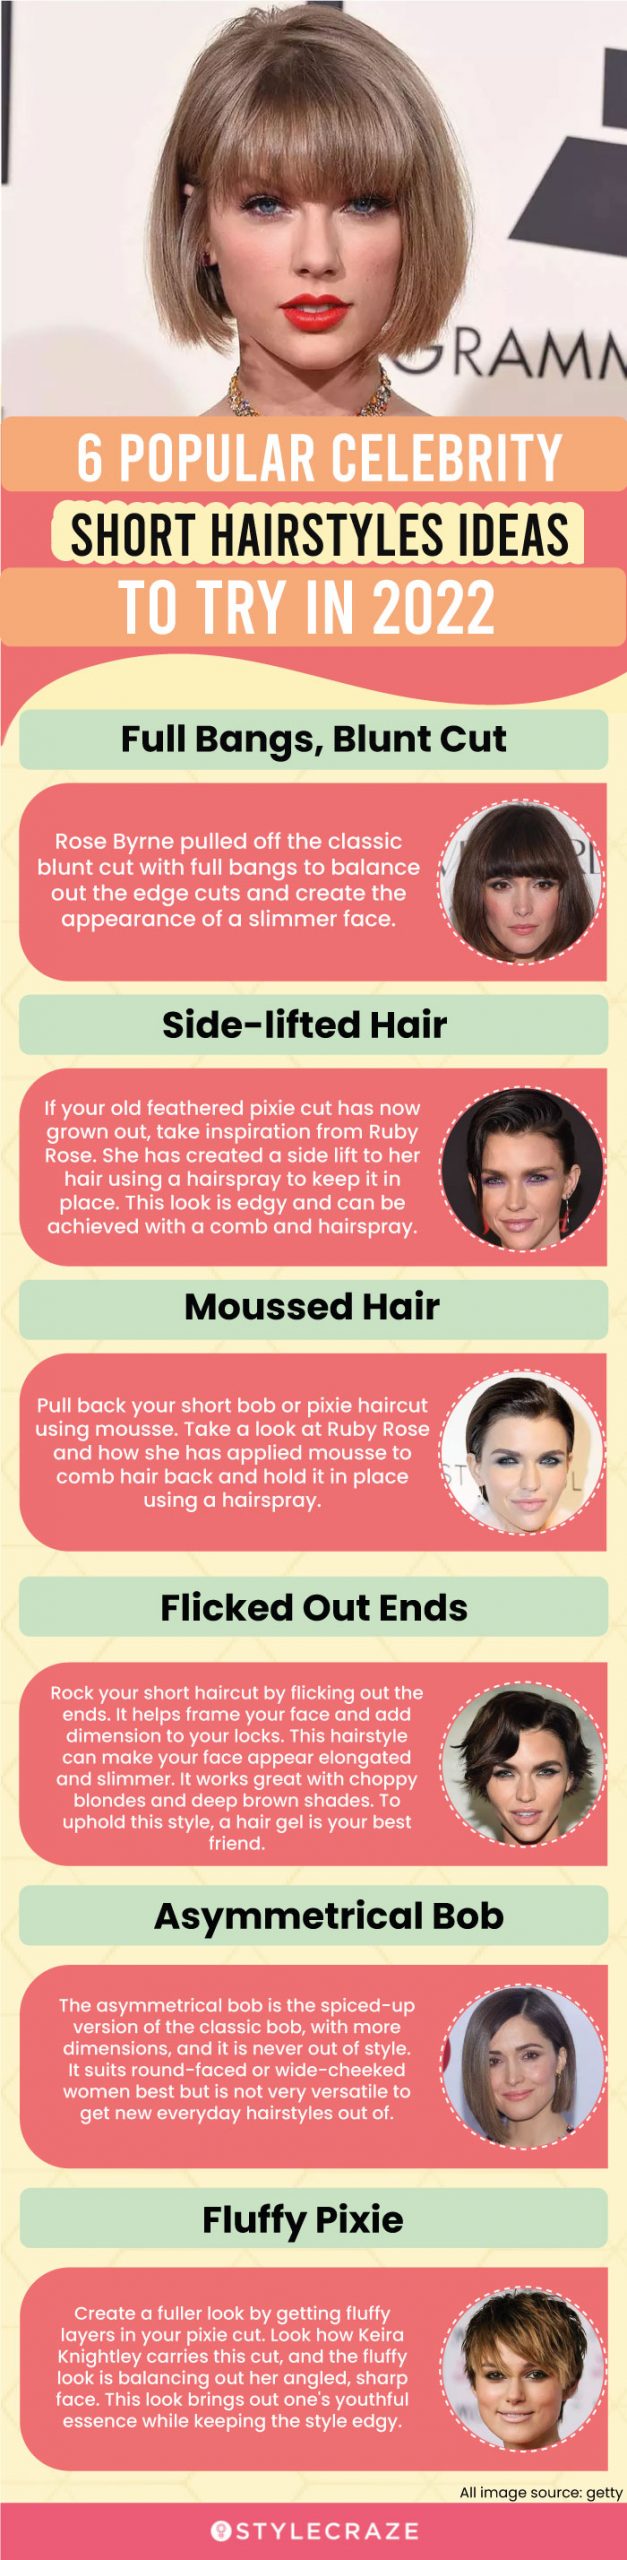 6 popular celebrity short hairstyles ideas (infographic)